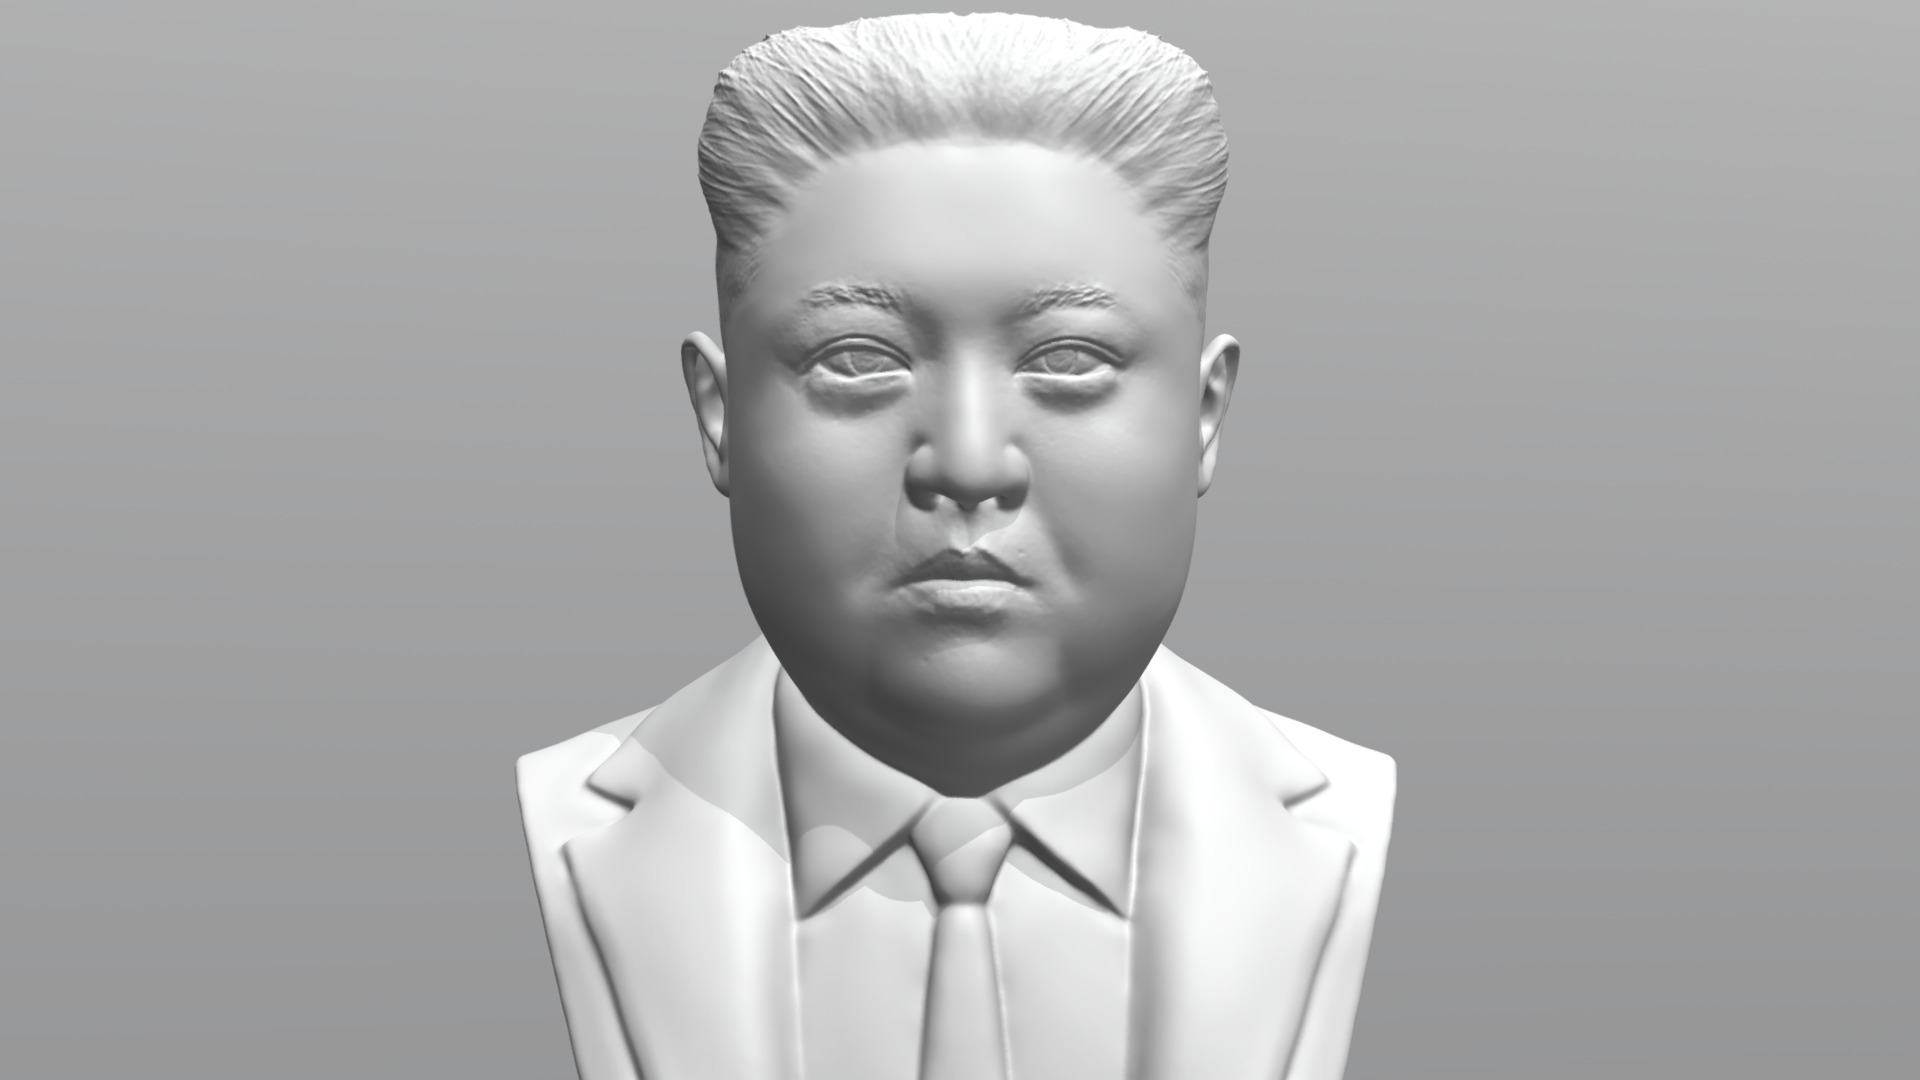 3D model Kim Jong-un bust for 3D printing - This is a 3D model of the Kim Jong-un bust for 3D printing. The 3D model is about a man in a suit.